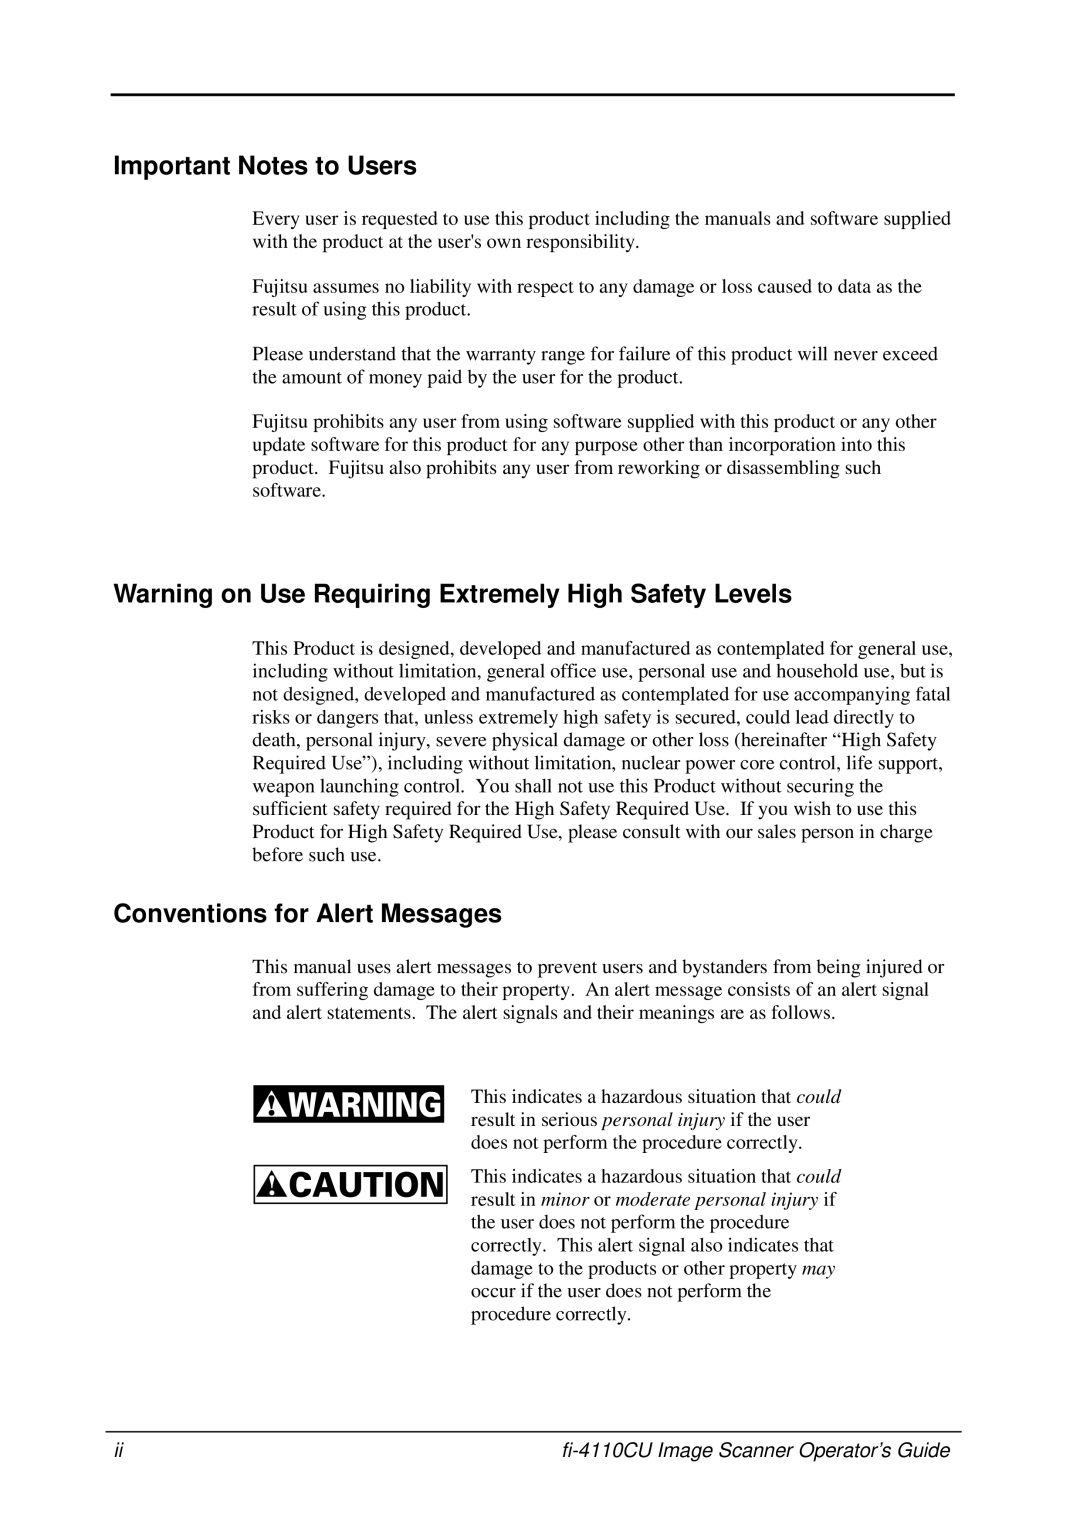 Fujitsu C150-E194-01EN manual Important Notes to Users, Warning on Use Requiring Extremely High Safety Levels 